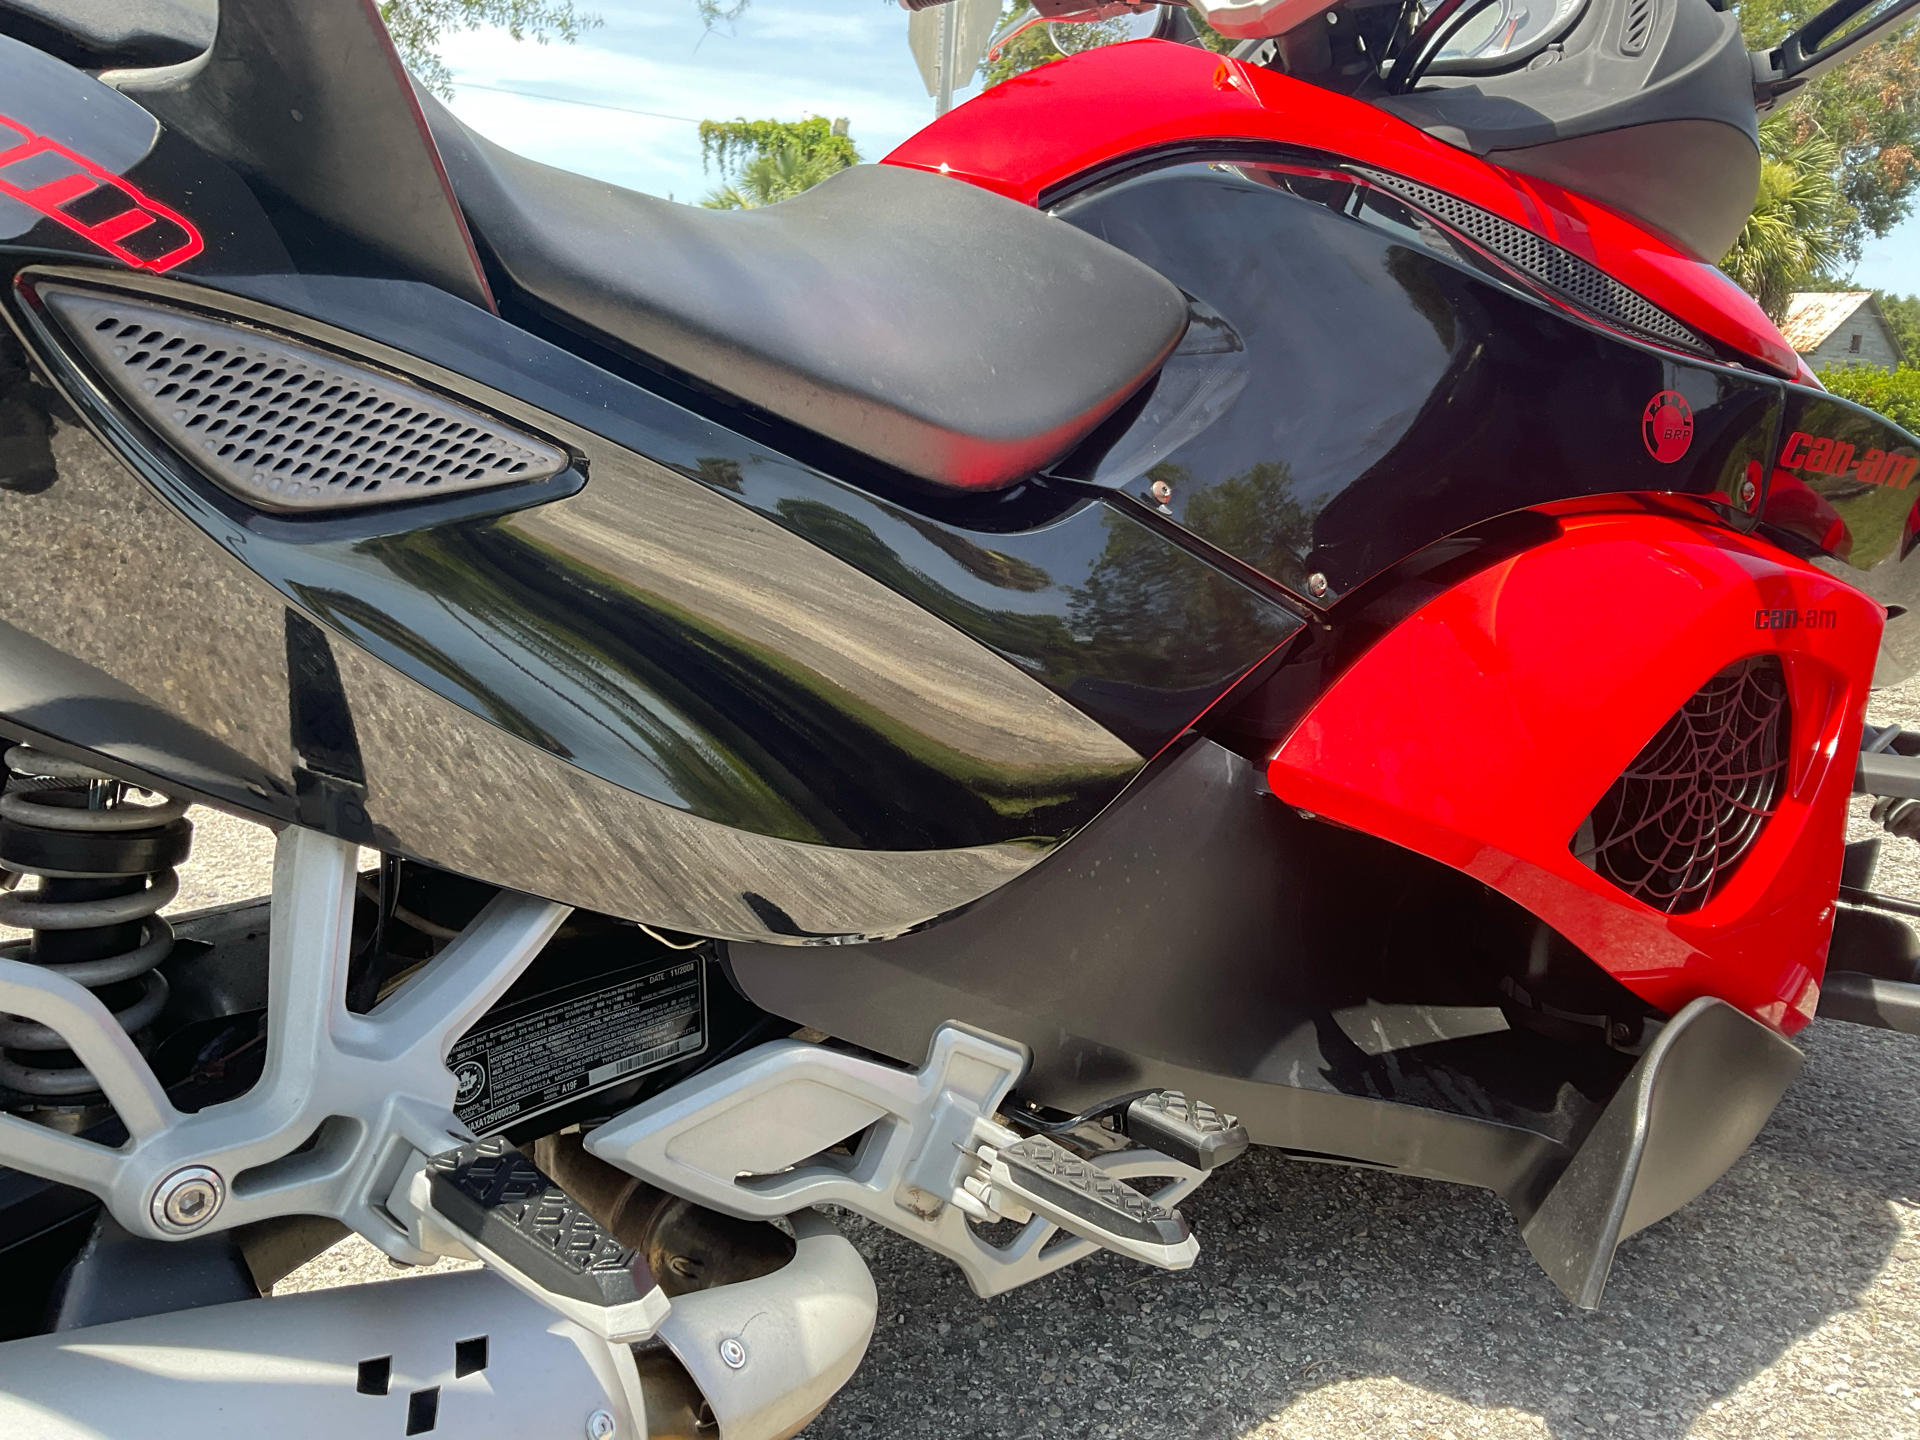 2009 Can-Am Spyder™ GS Roadster with SM5 Transmission (manual) in Sanford, Florida - Photo 12